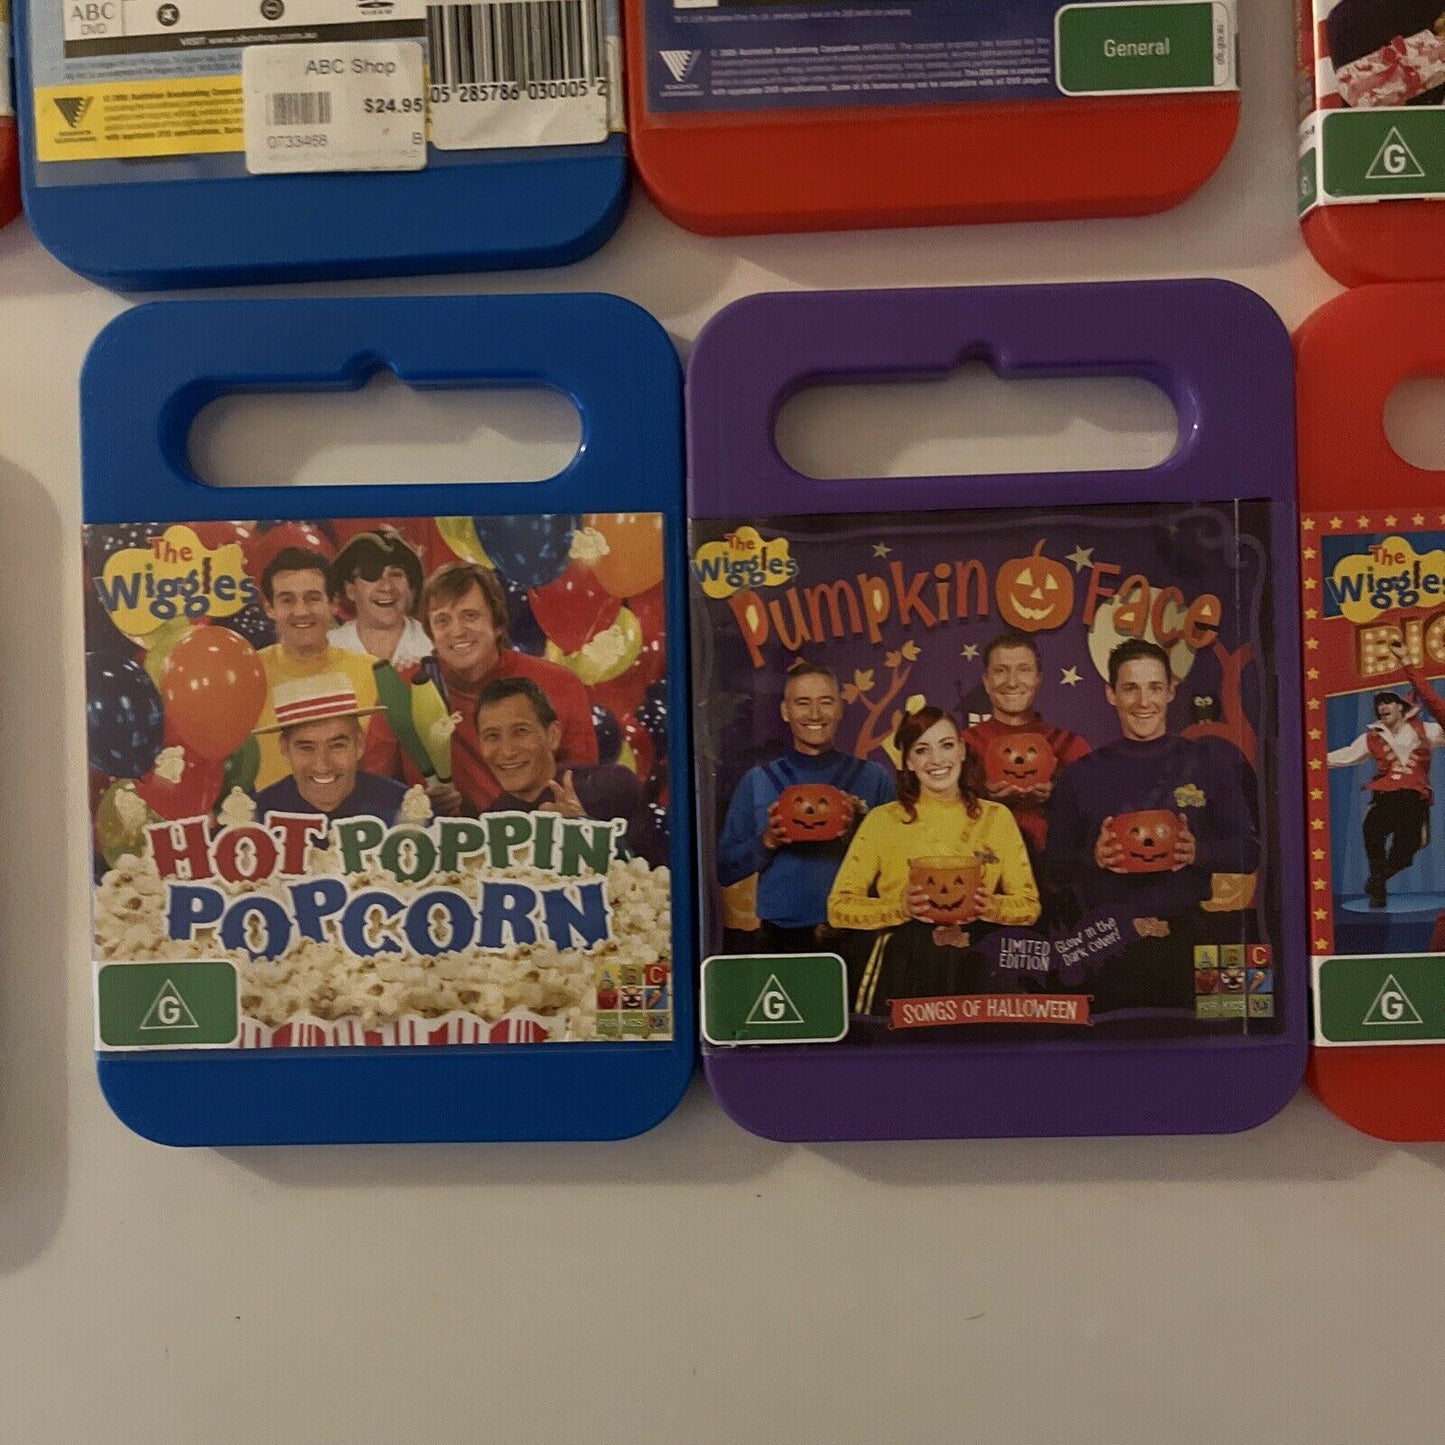 10x The Wiggles DVDs Region 4